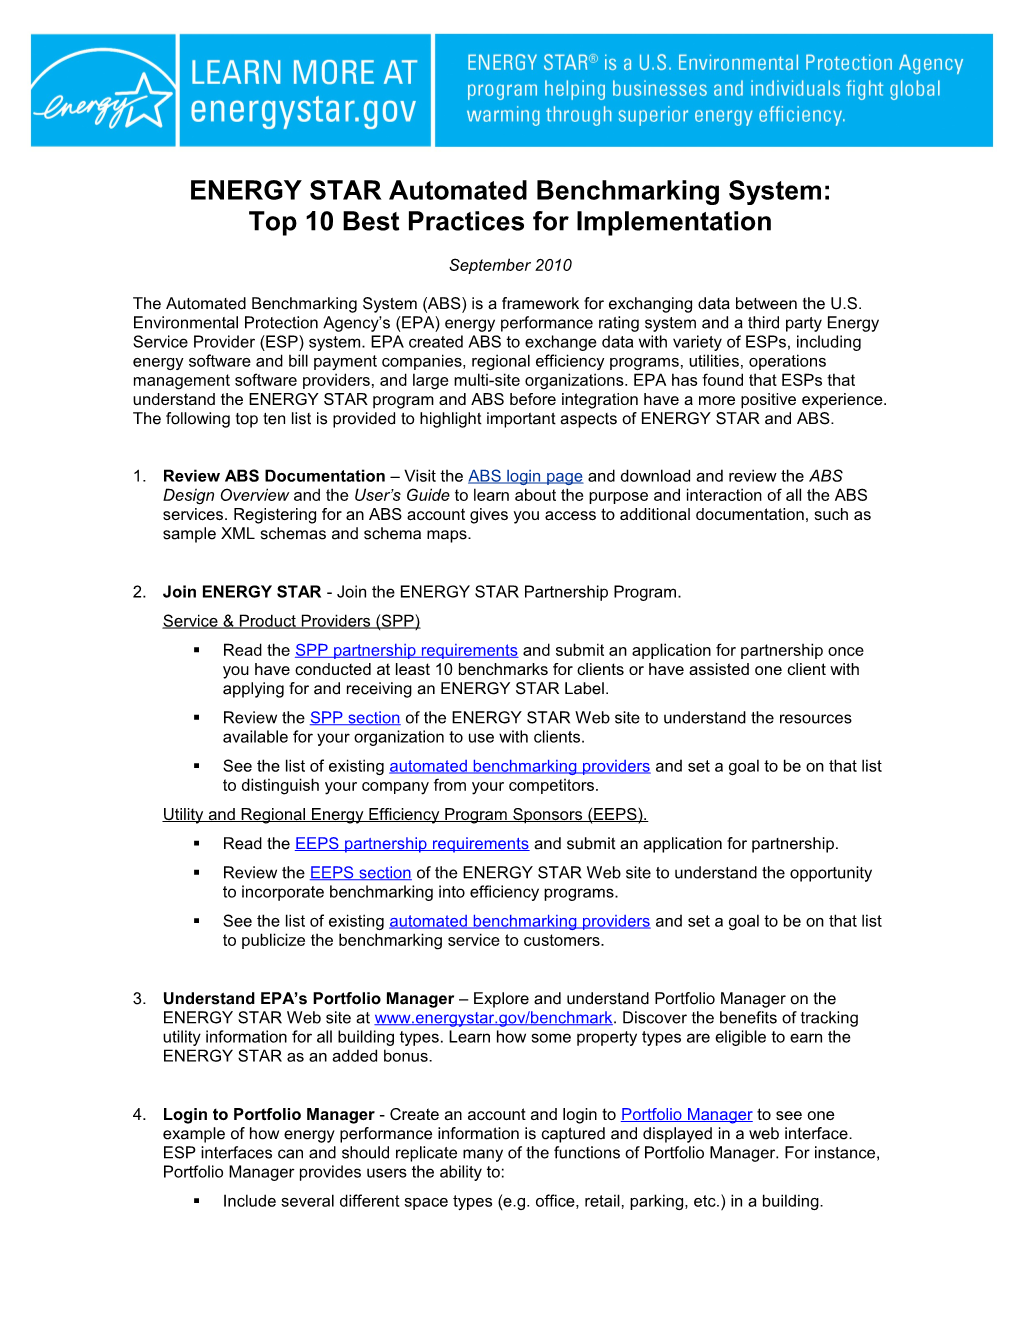 Improve Energy Performance with EPA S Portfolio Manager and Automated Benchmarking Services